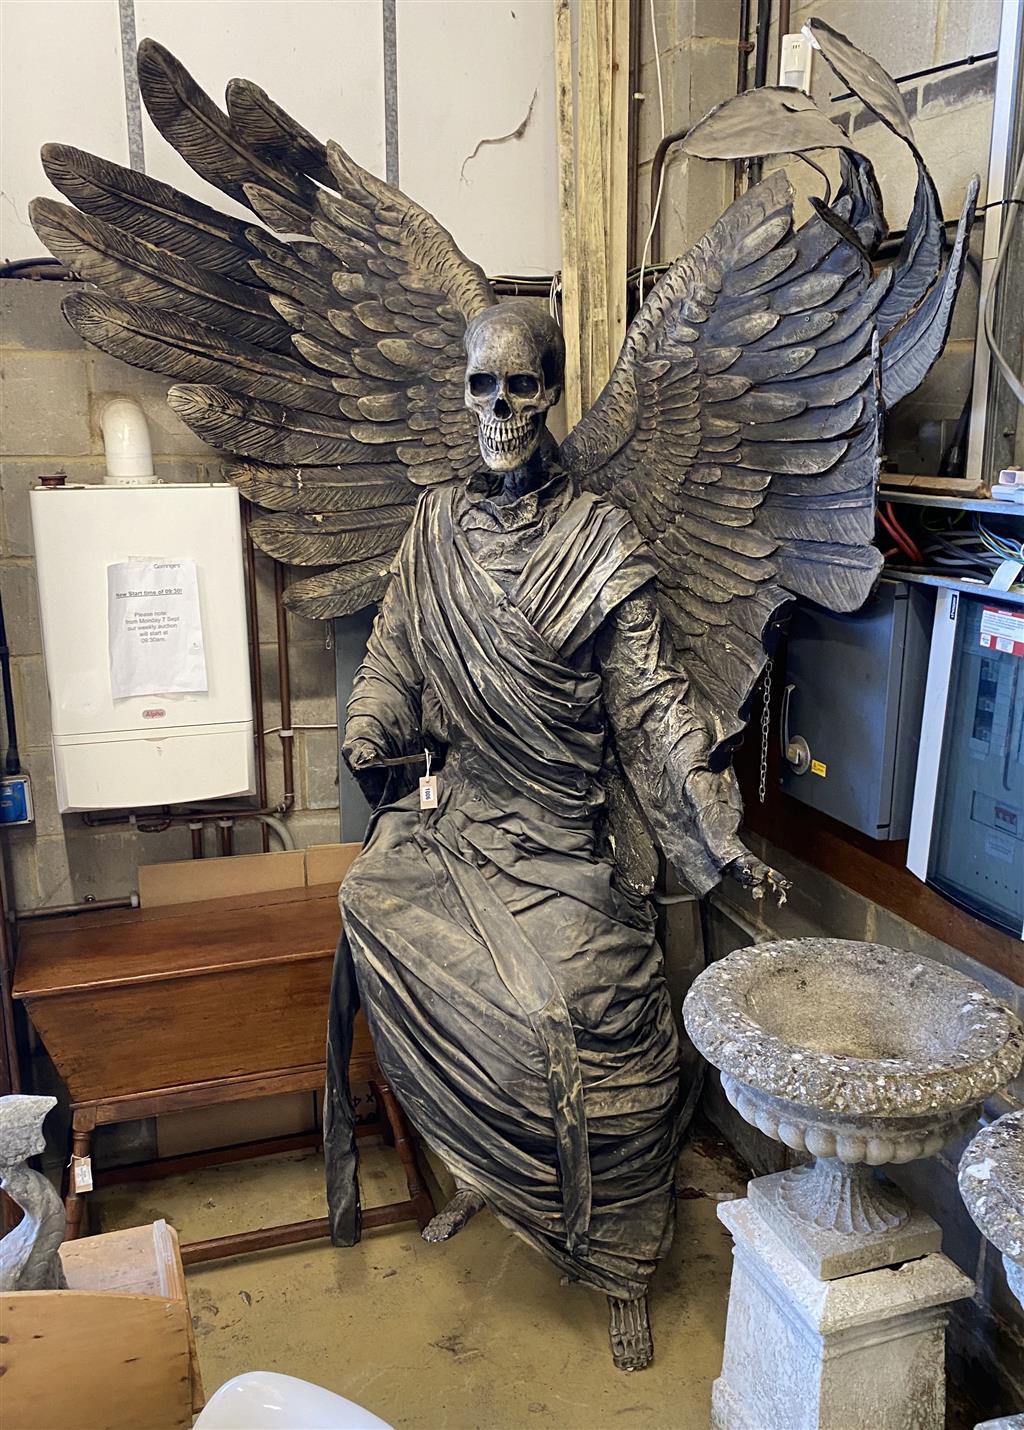 A composition and fabric theatrical figure The Angel of Death formerly modelled for Glyndebourne opera house and then in residence